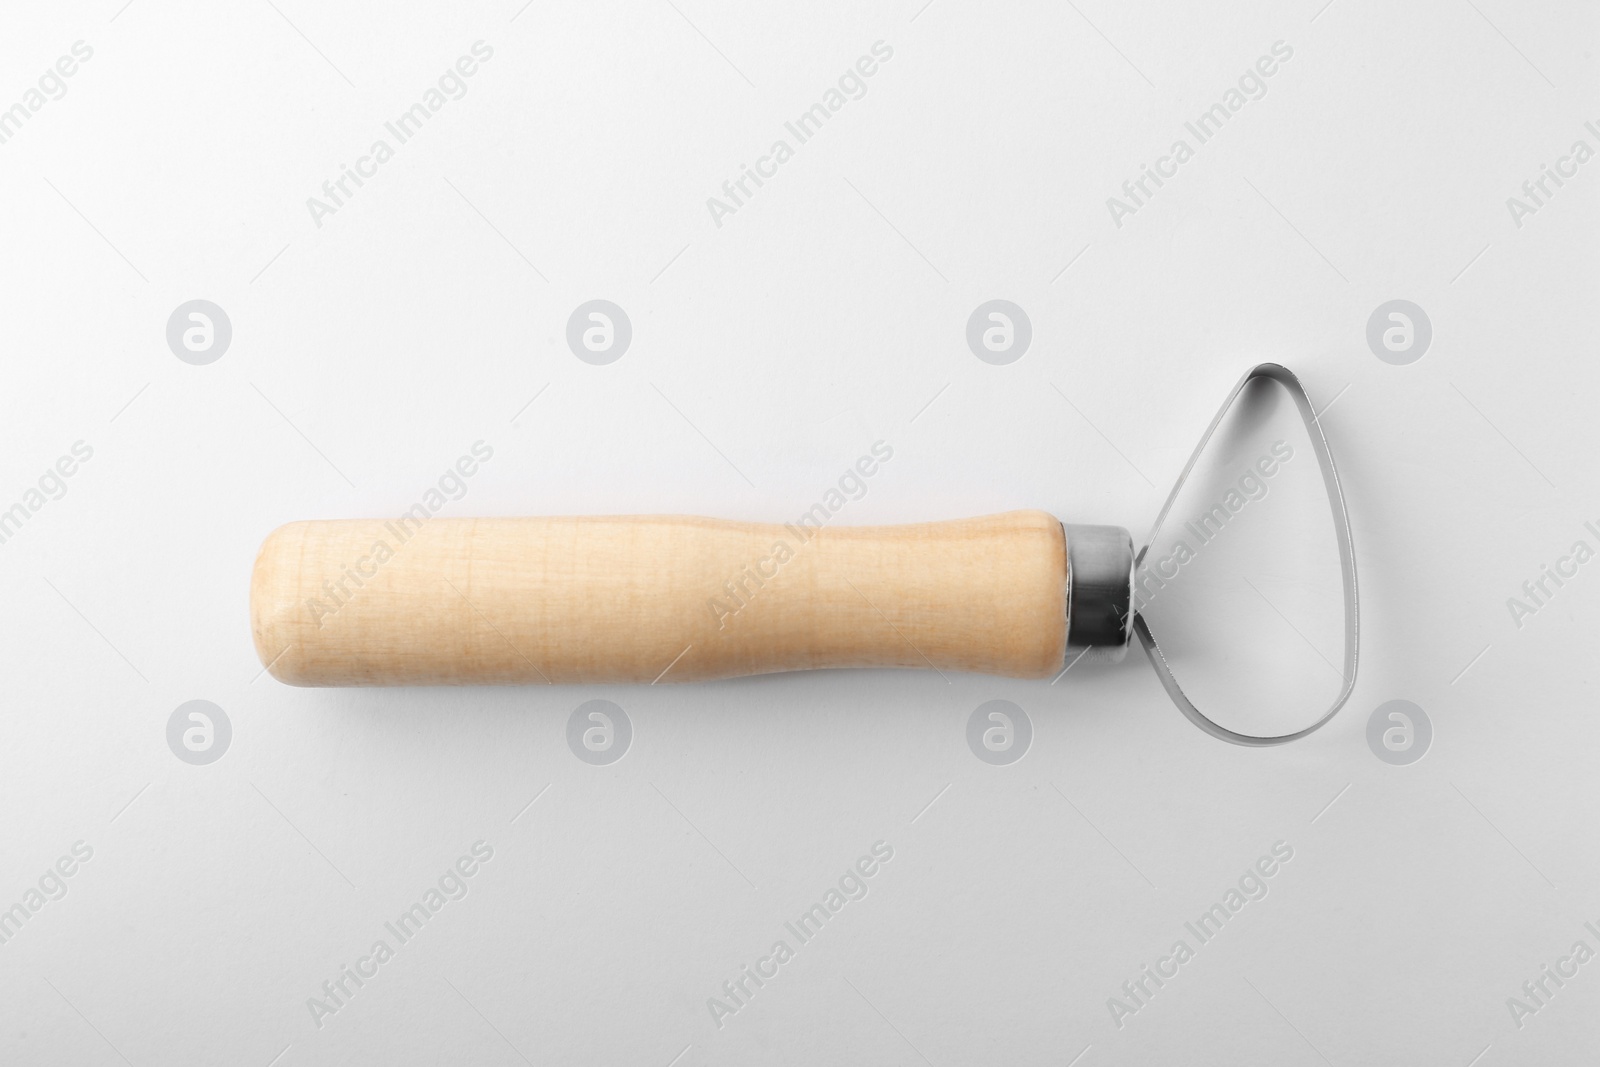 Photo of Loop tool with wooden handle for clay modeling on white background, top view